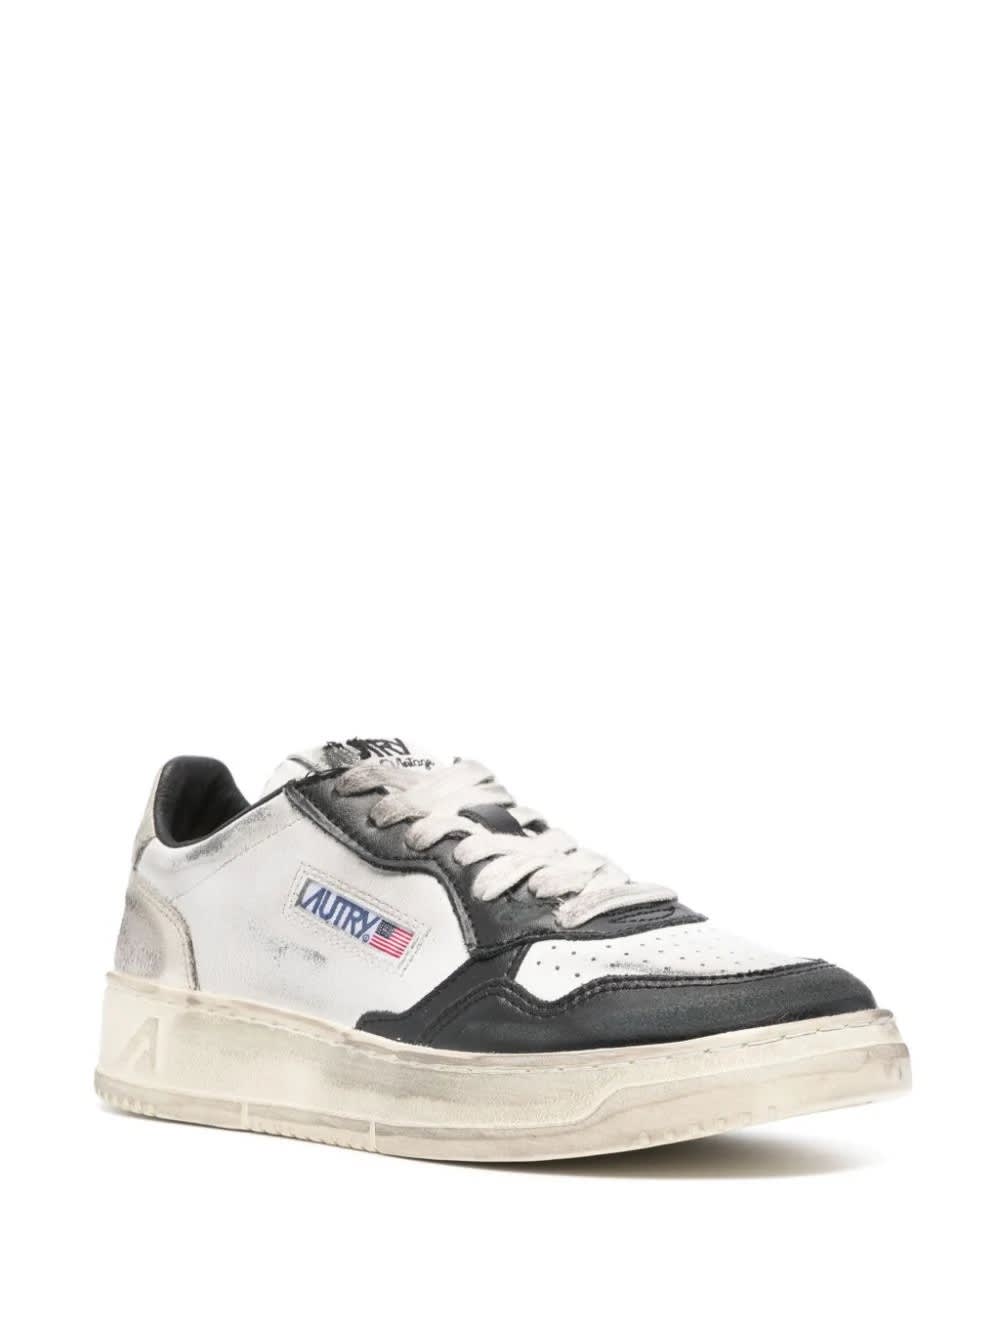 Shop Autry Super Vintage Medalist Low Sneakers In White, Silver And Black Leather